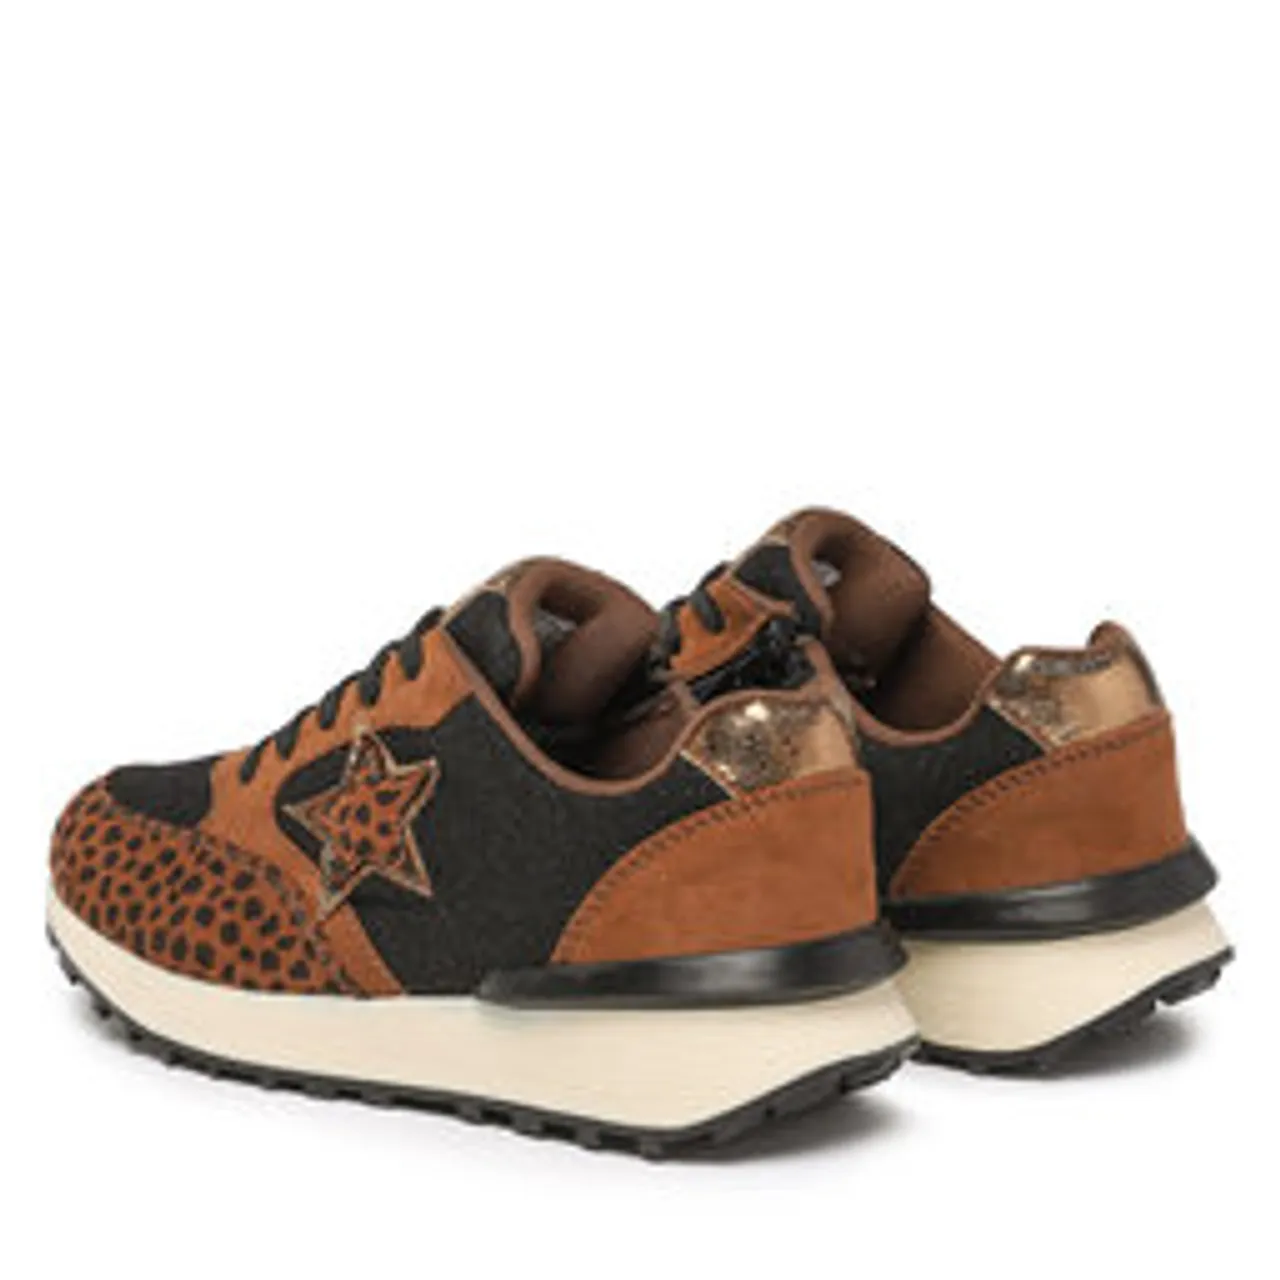 Sneakers s.Oliver 5-43201-39 Nature Comb 419